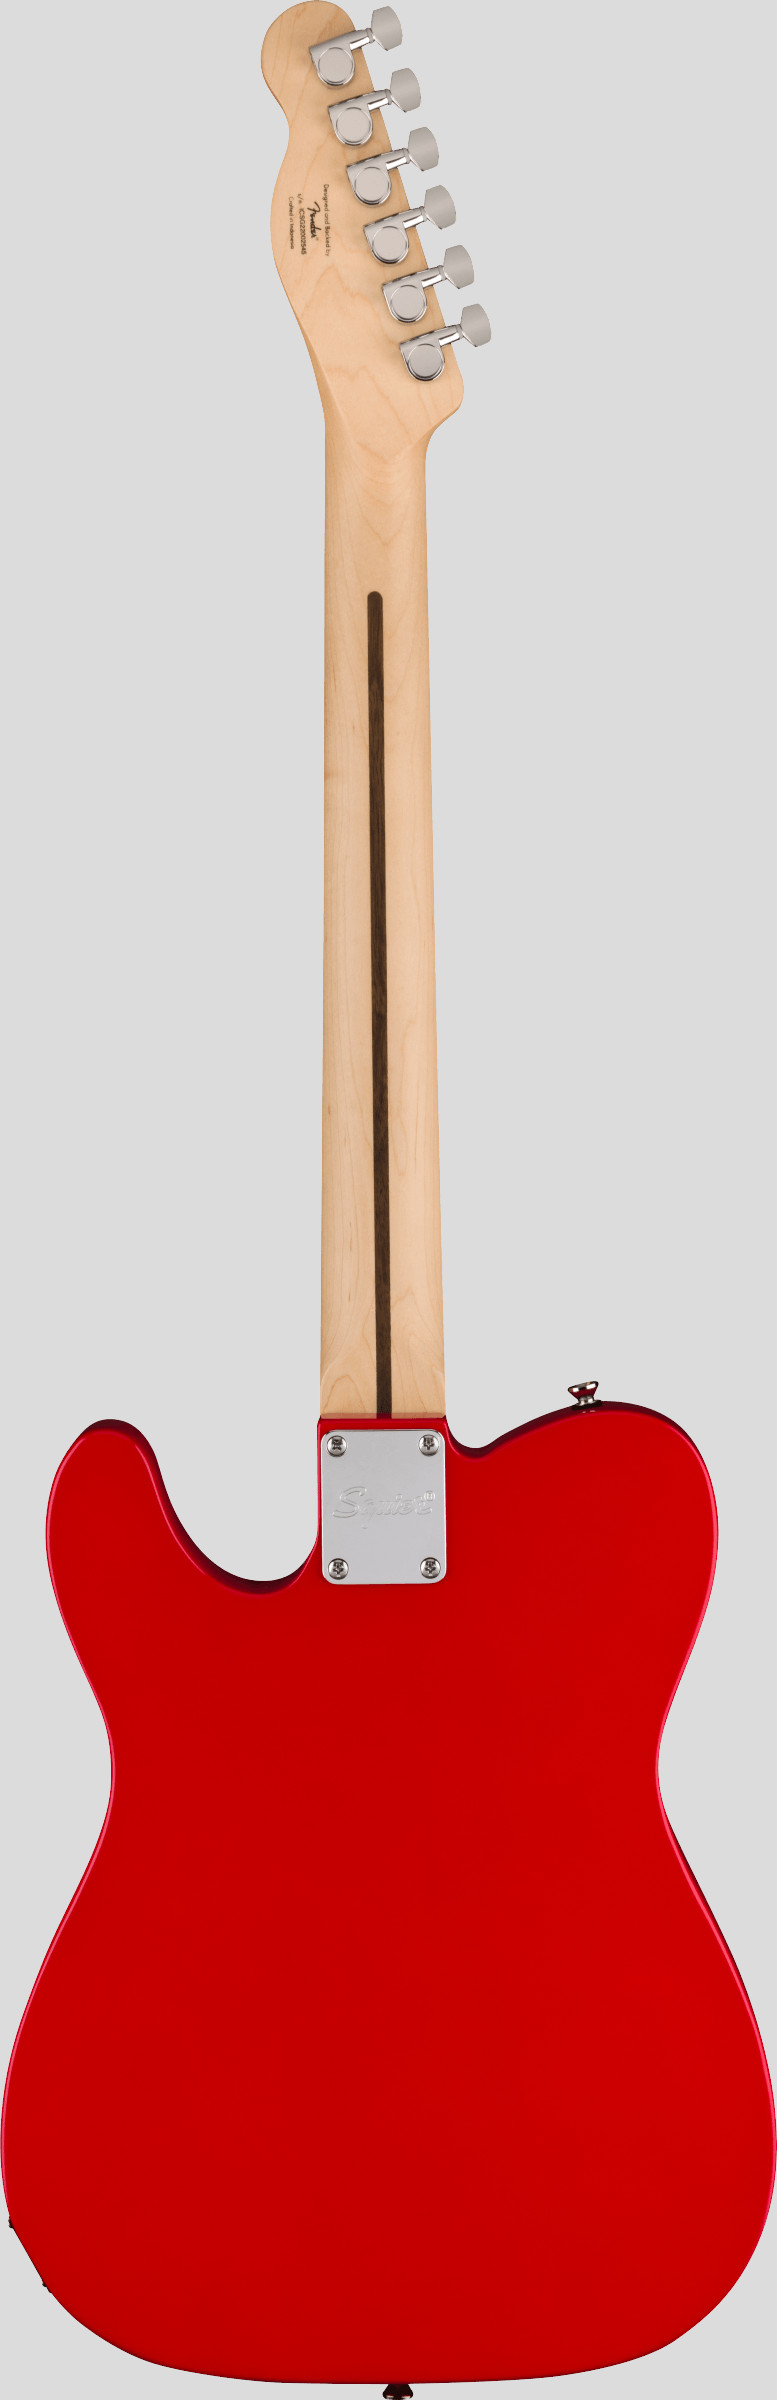 Squier by Fender Sonic Telecaster Torino Red 2